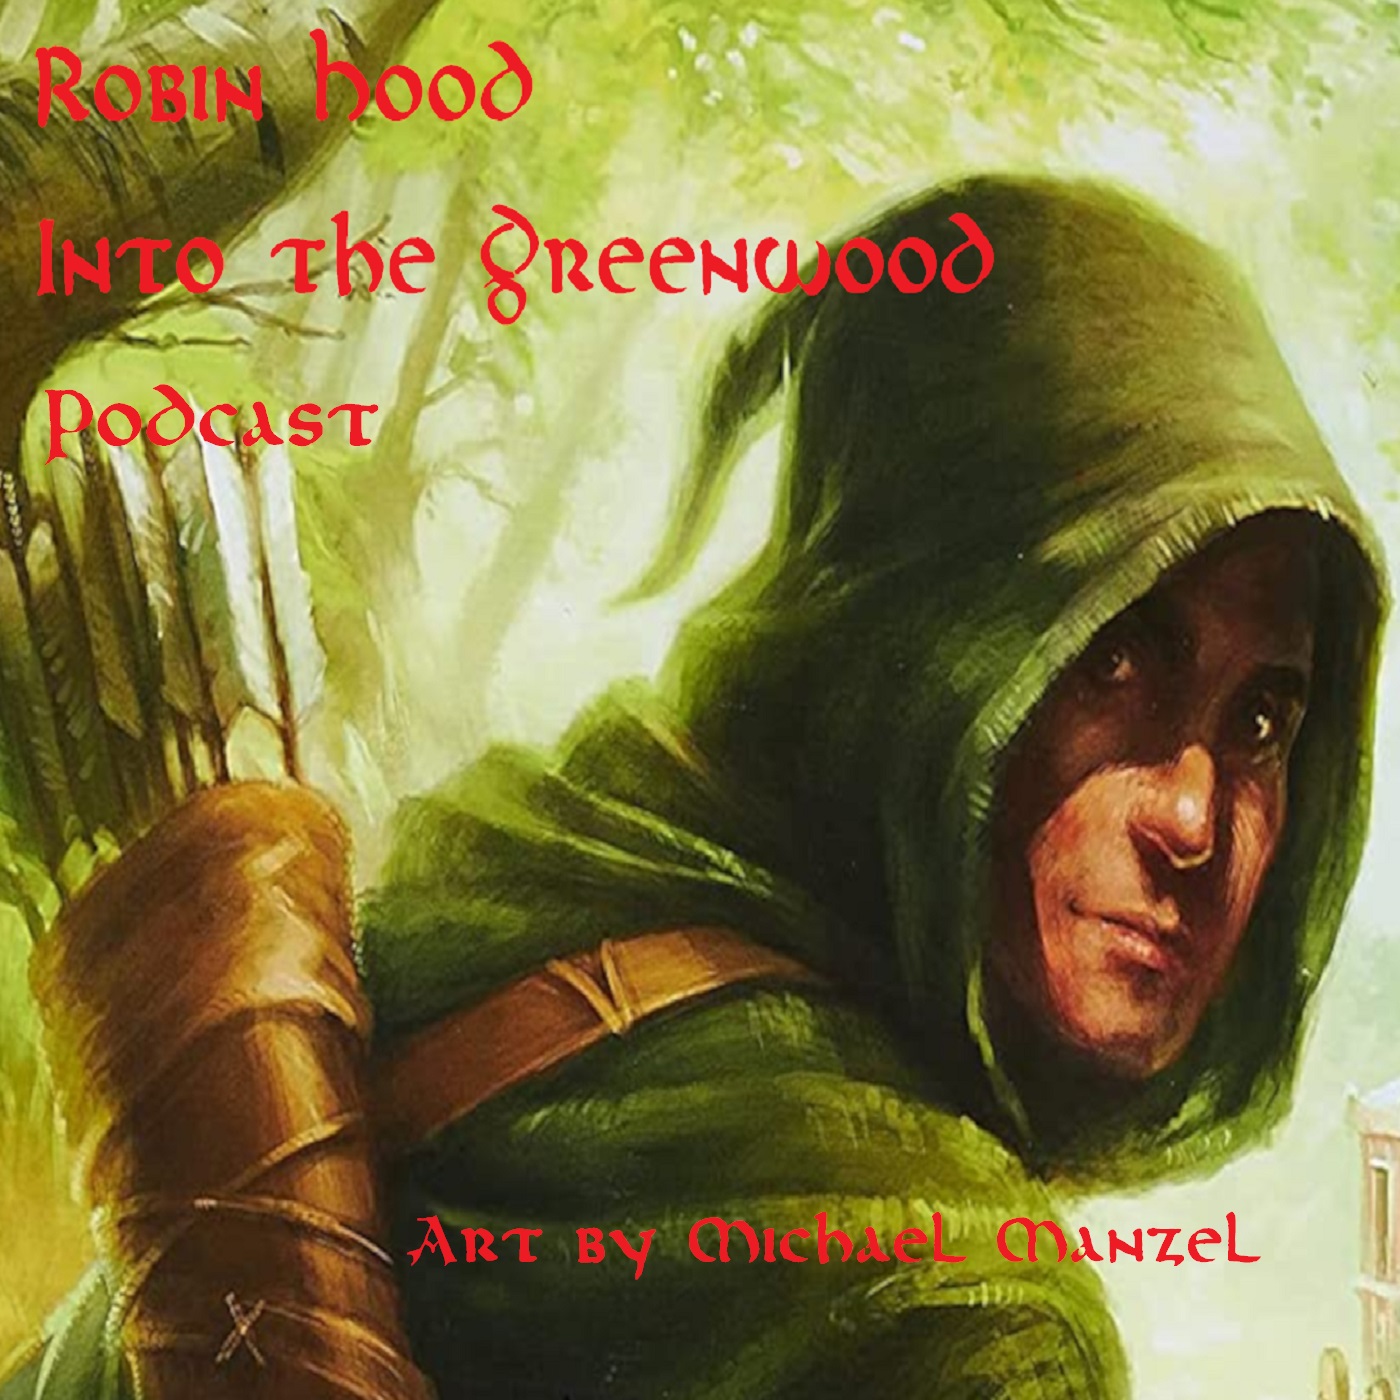 Robin Hood - with Into the Greenwood